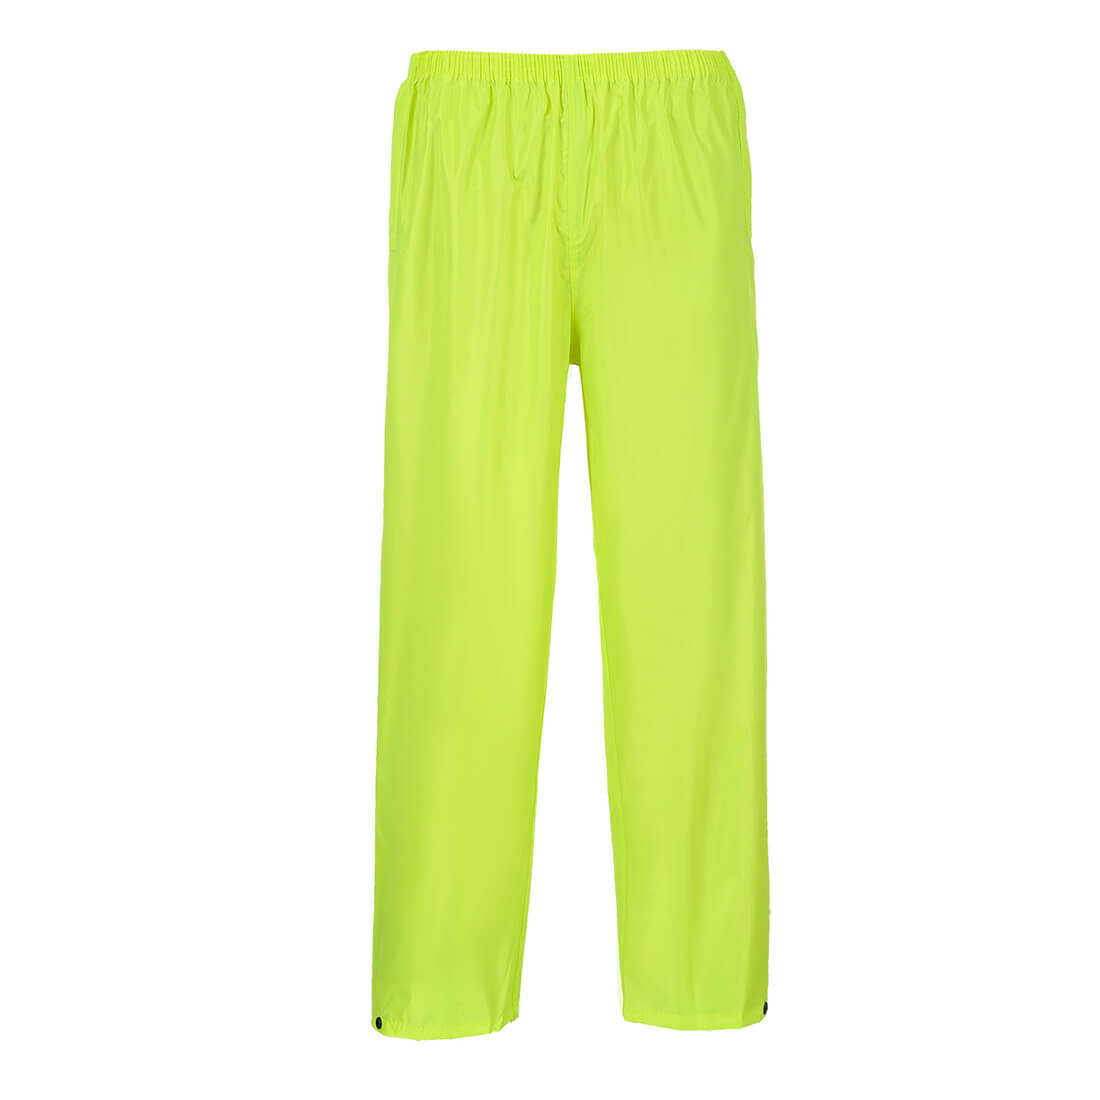 Image of Portwest Classic Rain Trousers Yellow 3XL